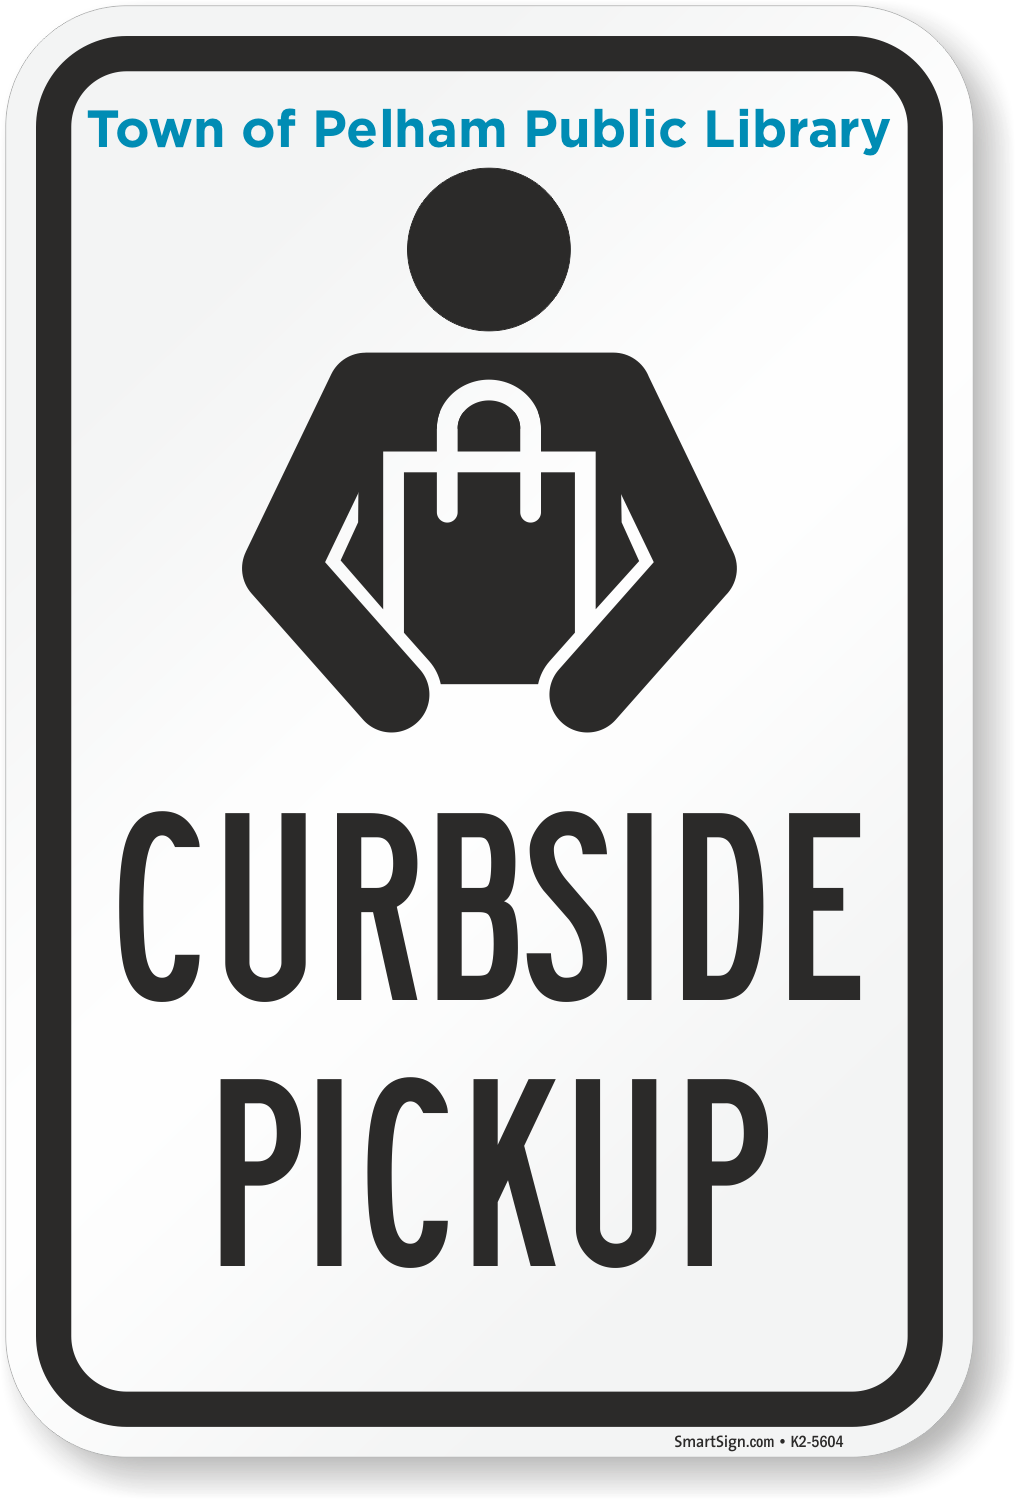 The Library Begins Curbside Pickup Services